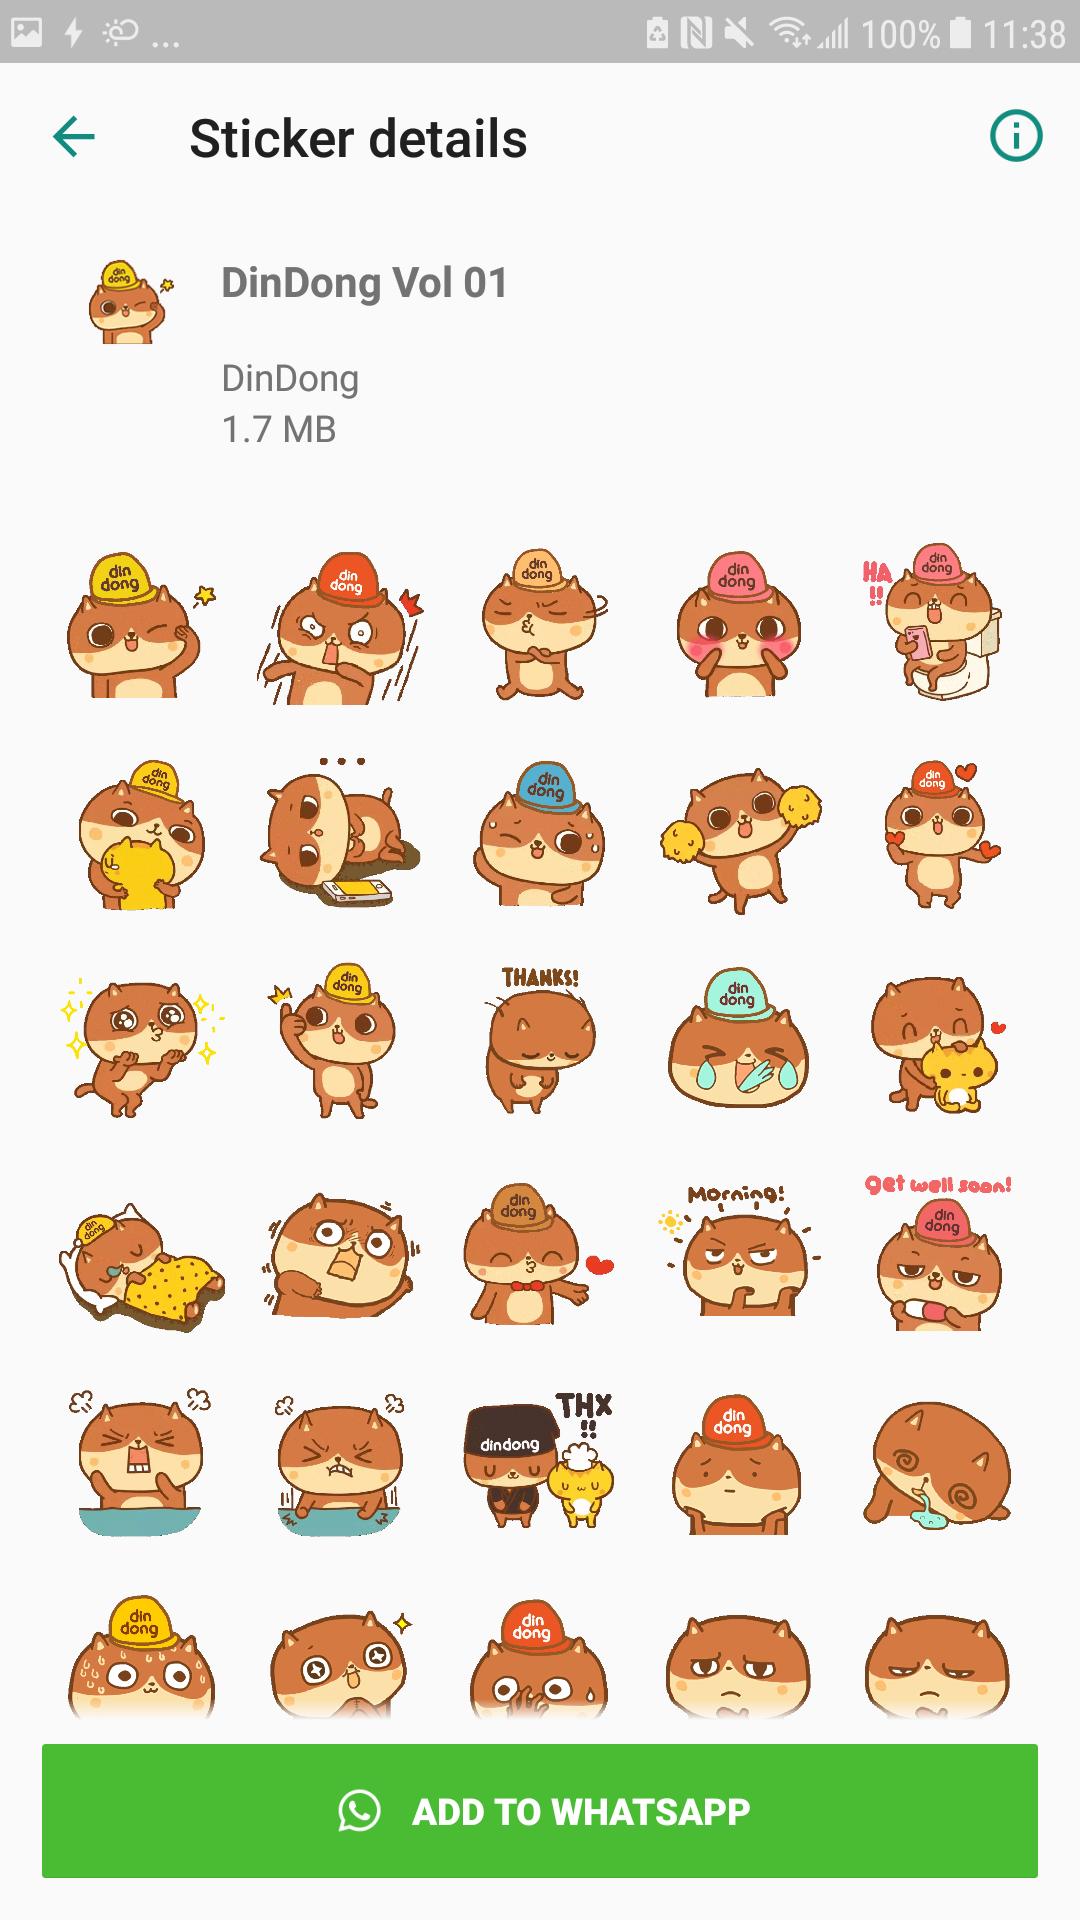 DinDong WhatsApp sticker for Android - APK Download